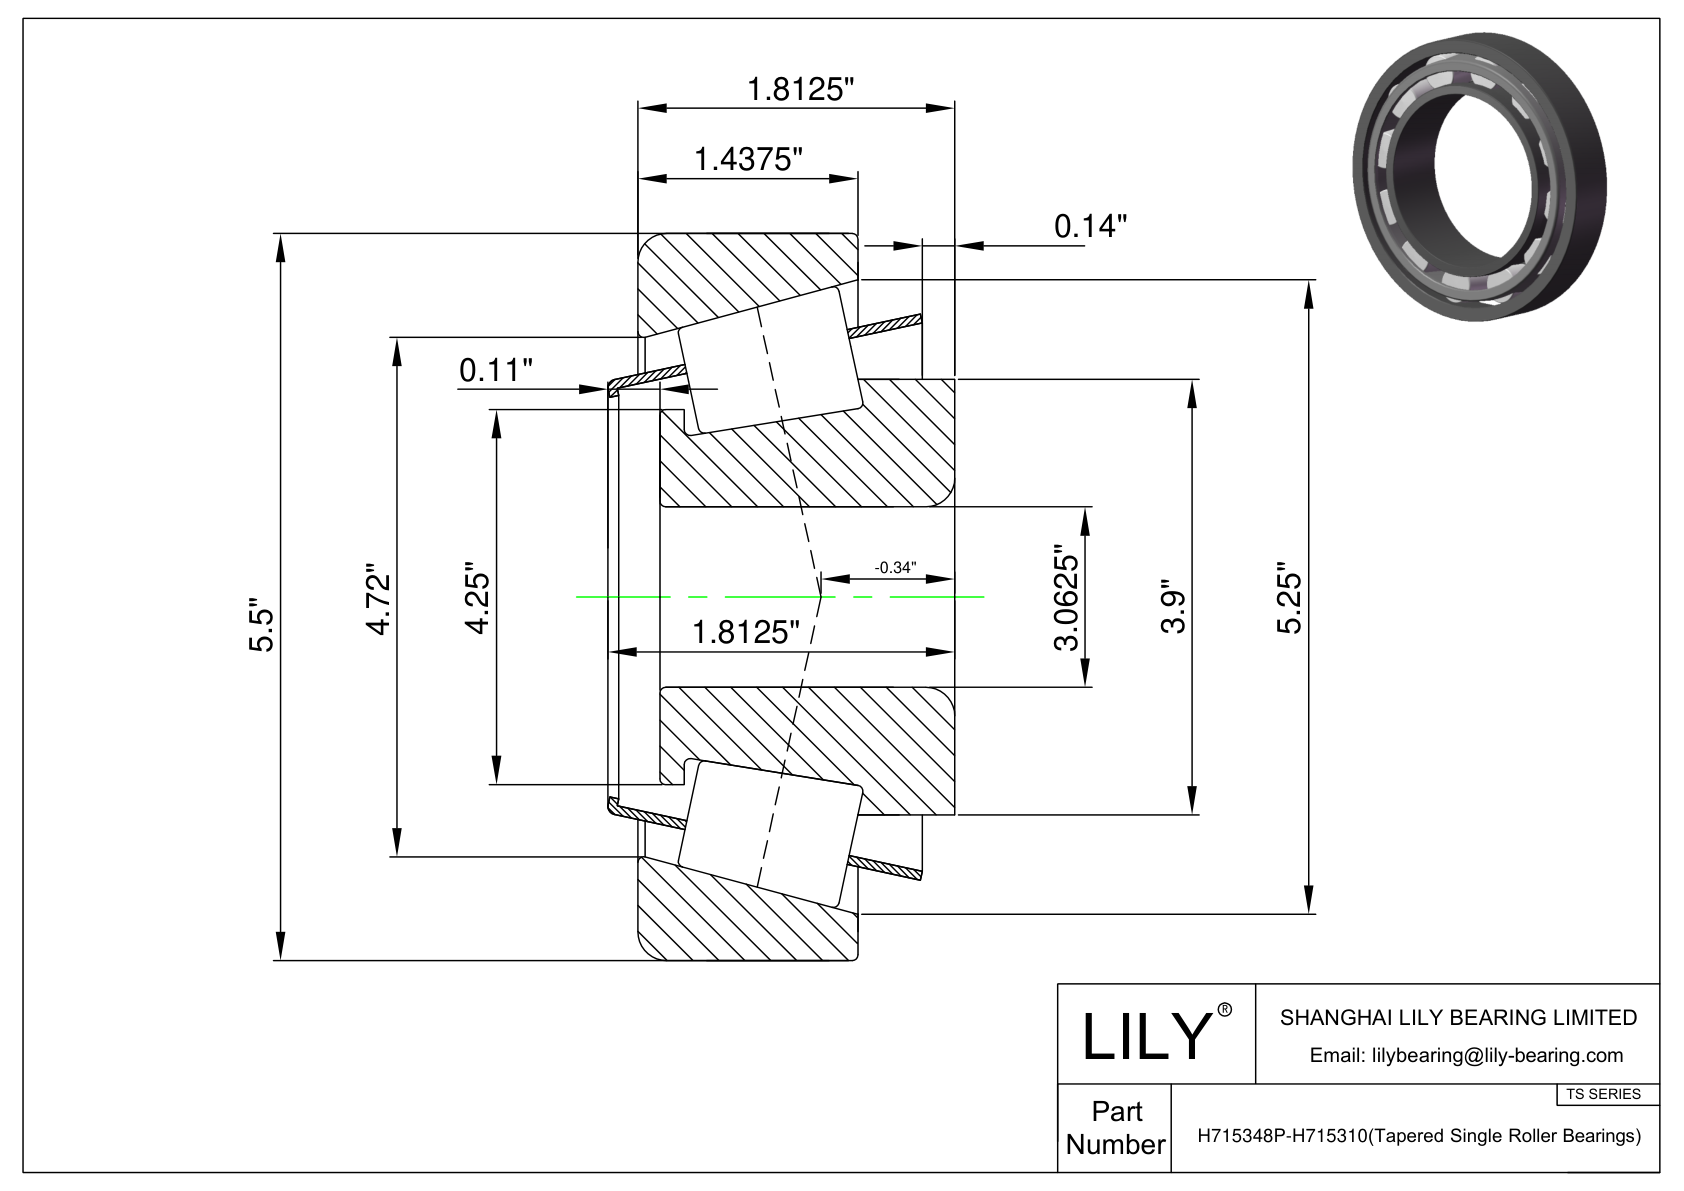 H715348P-H715310 TS (Tapered Single Roller Bearings) (Imperial) cad drawing